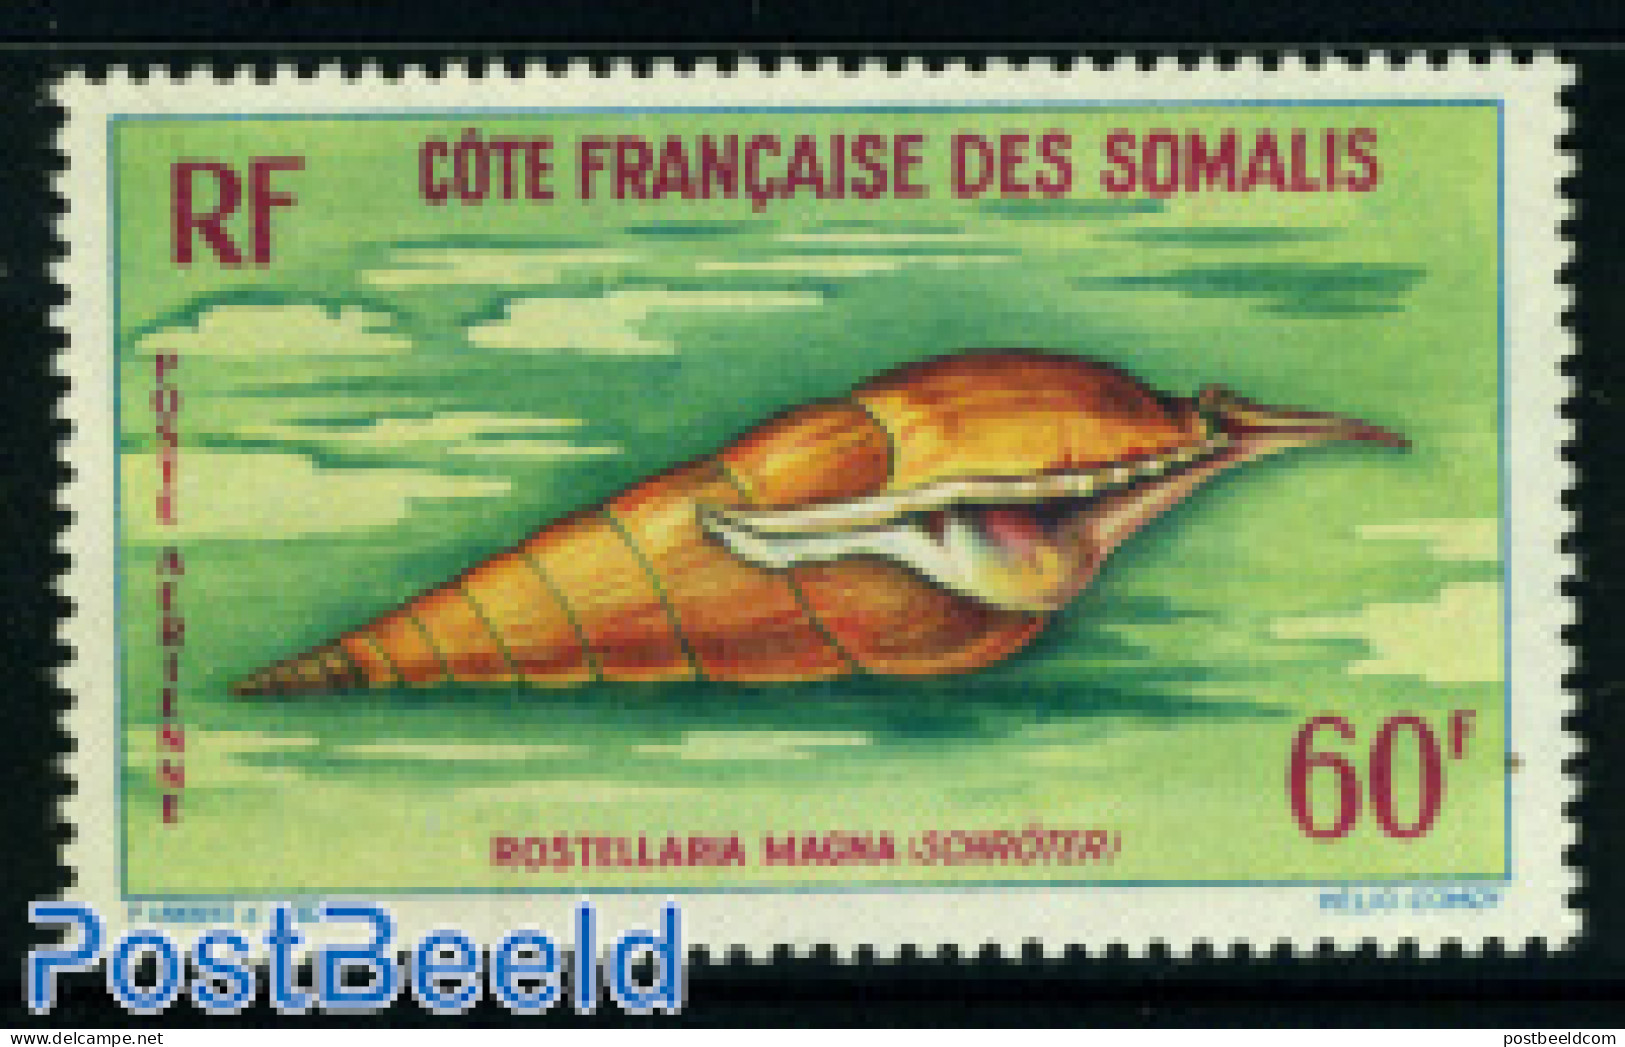 French Somalia 1962 60F, Stamp Out Of Set, Mint NH, Nature - Shells & Crustaceans - Maritiem Leven